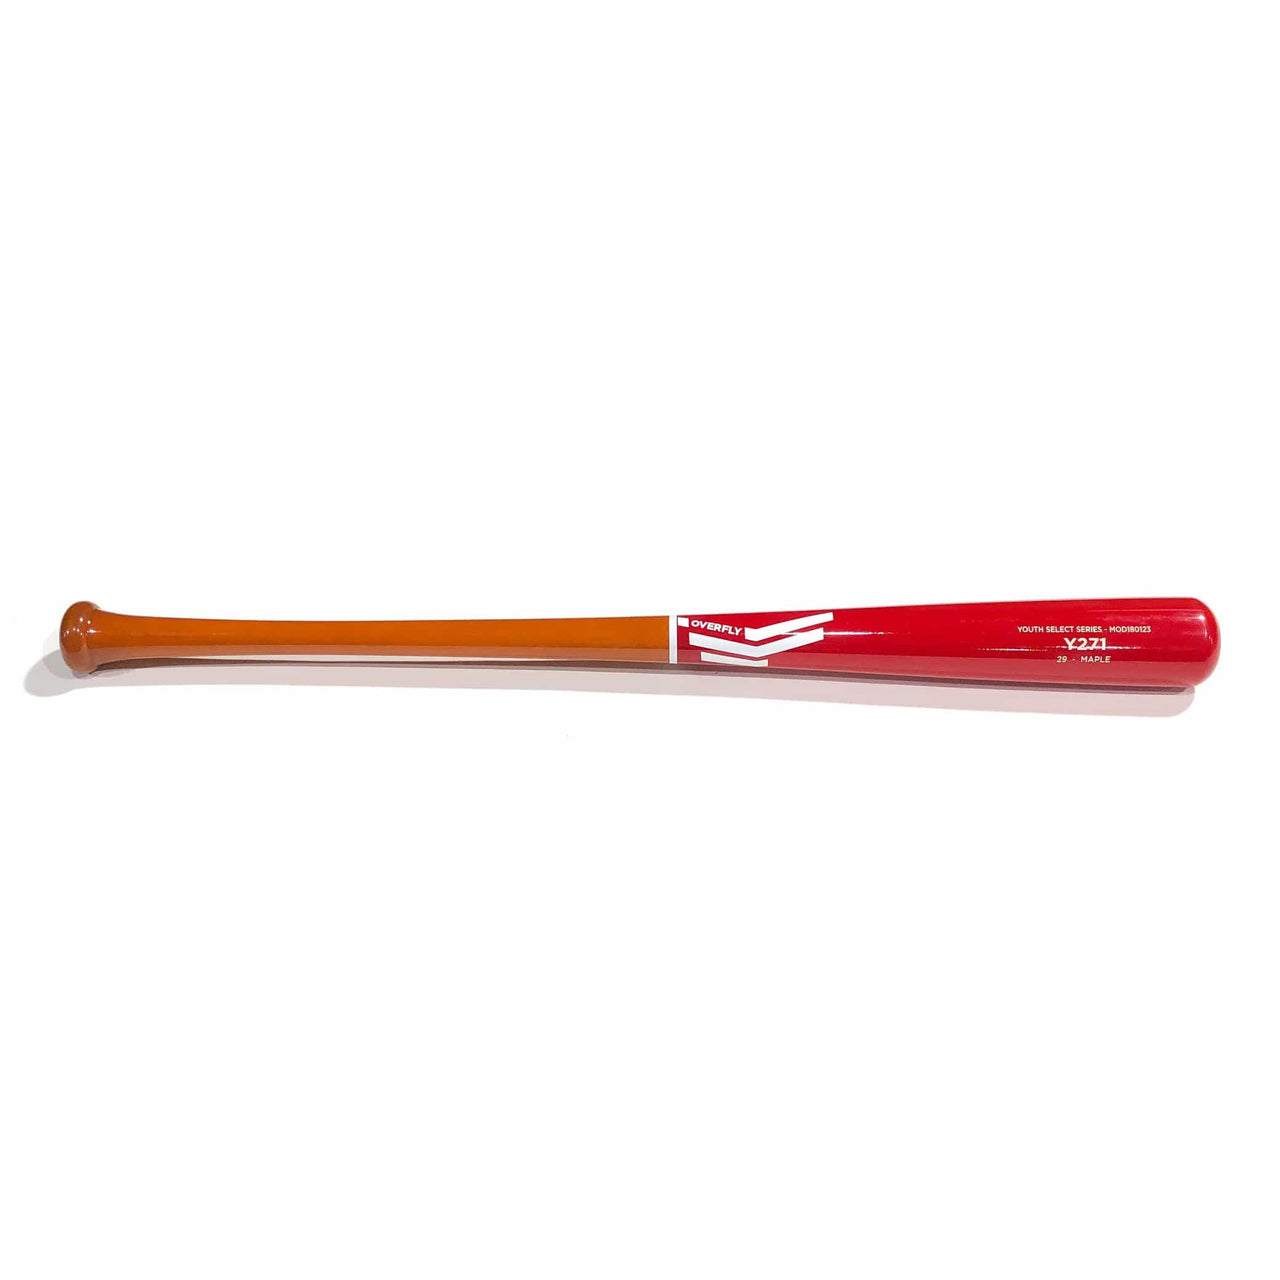 Overfly Sports Playing Bats Orange | Red | White / 29" / (-7) Overfly Sports Model Y271 Wood Bat | 29" (-7) | Maple